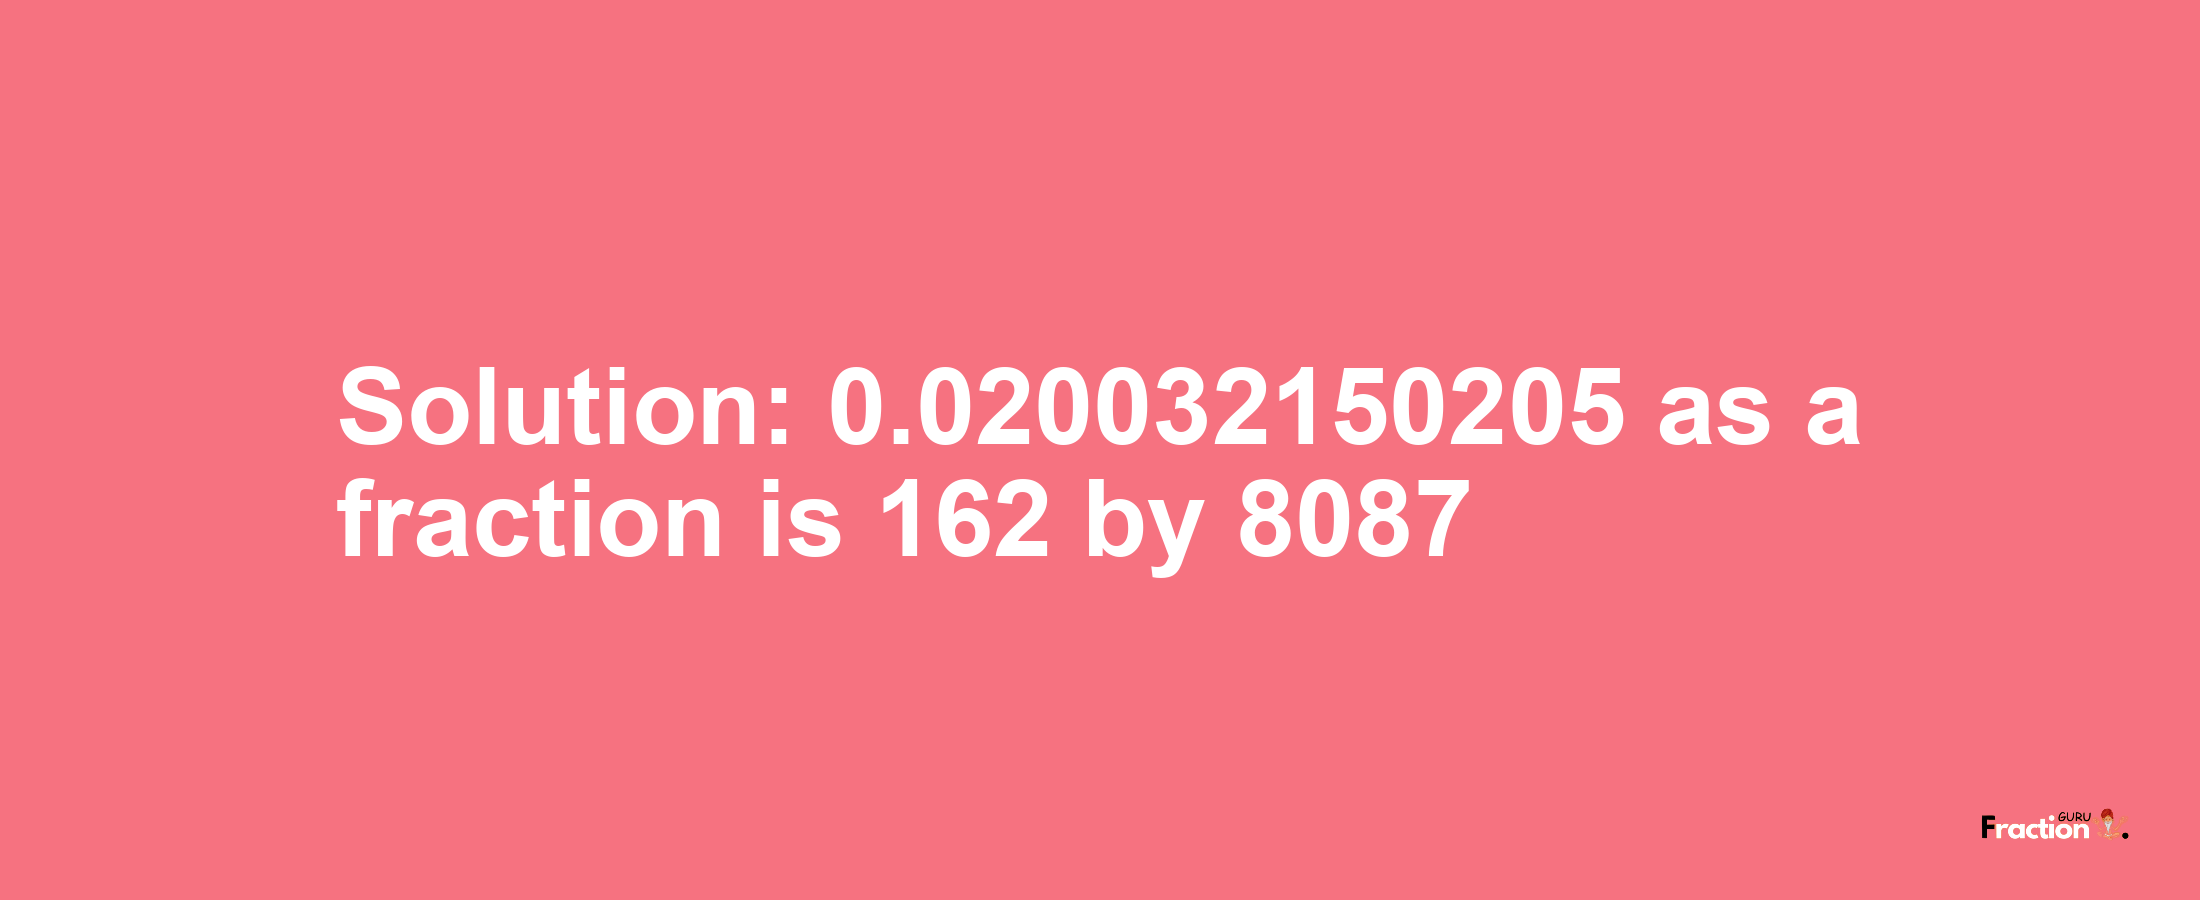 Solution:0.020032150205 as a fraction is 162/8087